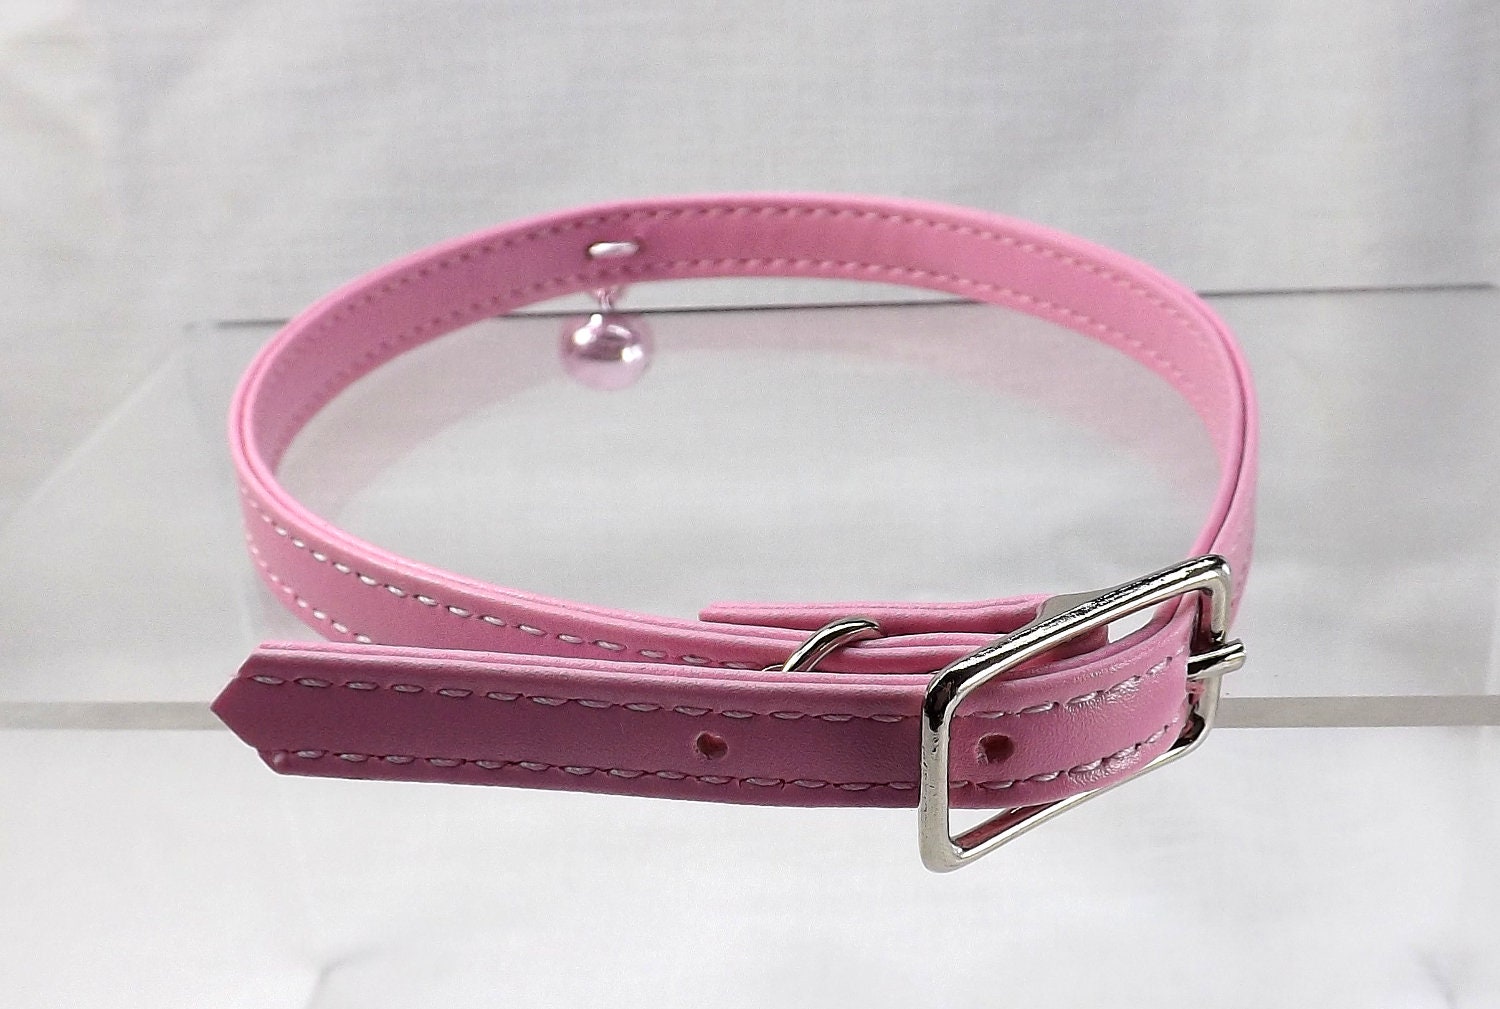 Bdsm collar discreet ddlg collar kitten play leather babygirl bdsm day collar bell slave collar leather choker - product images  of 